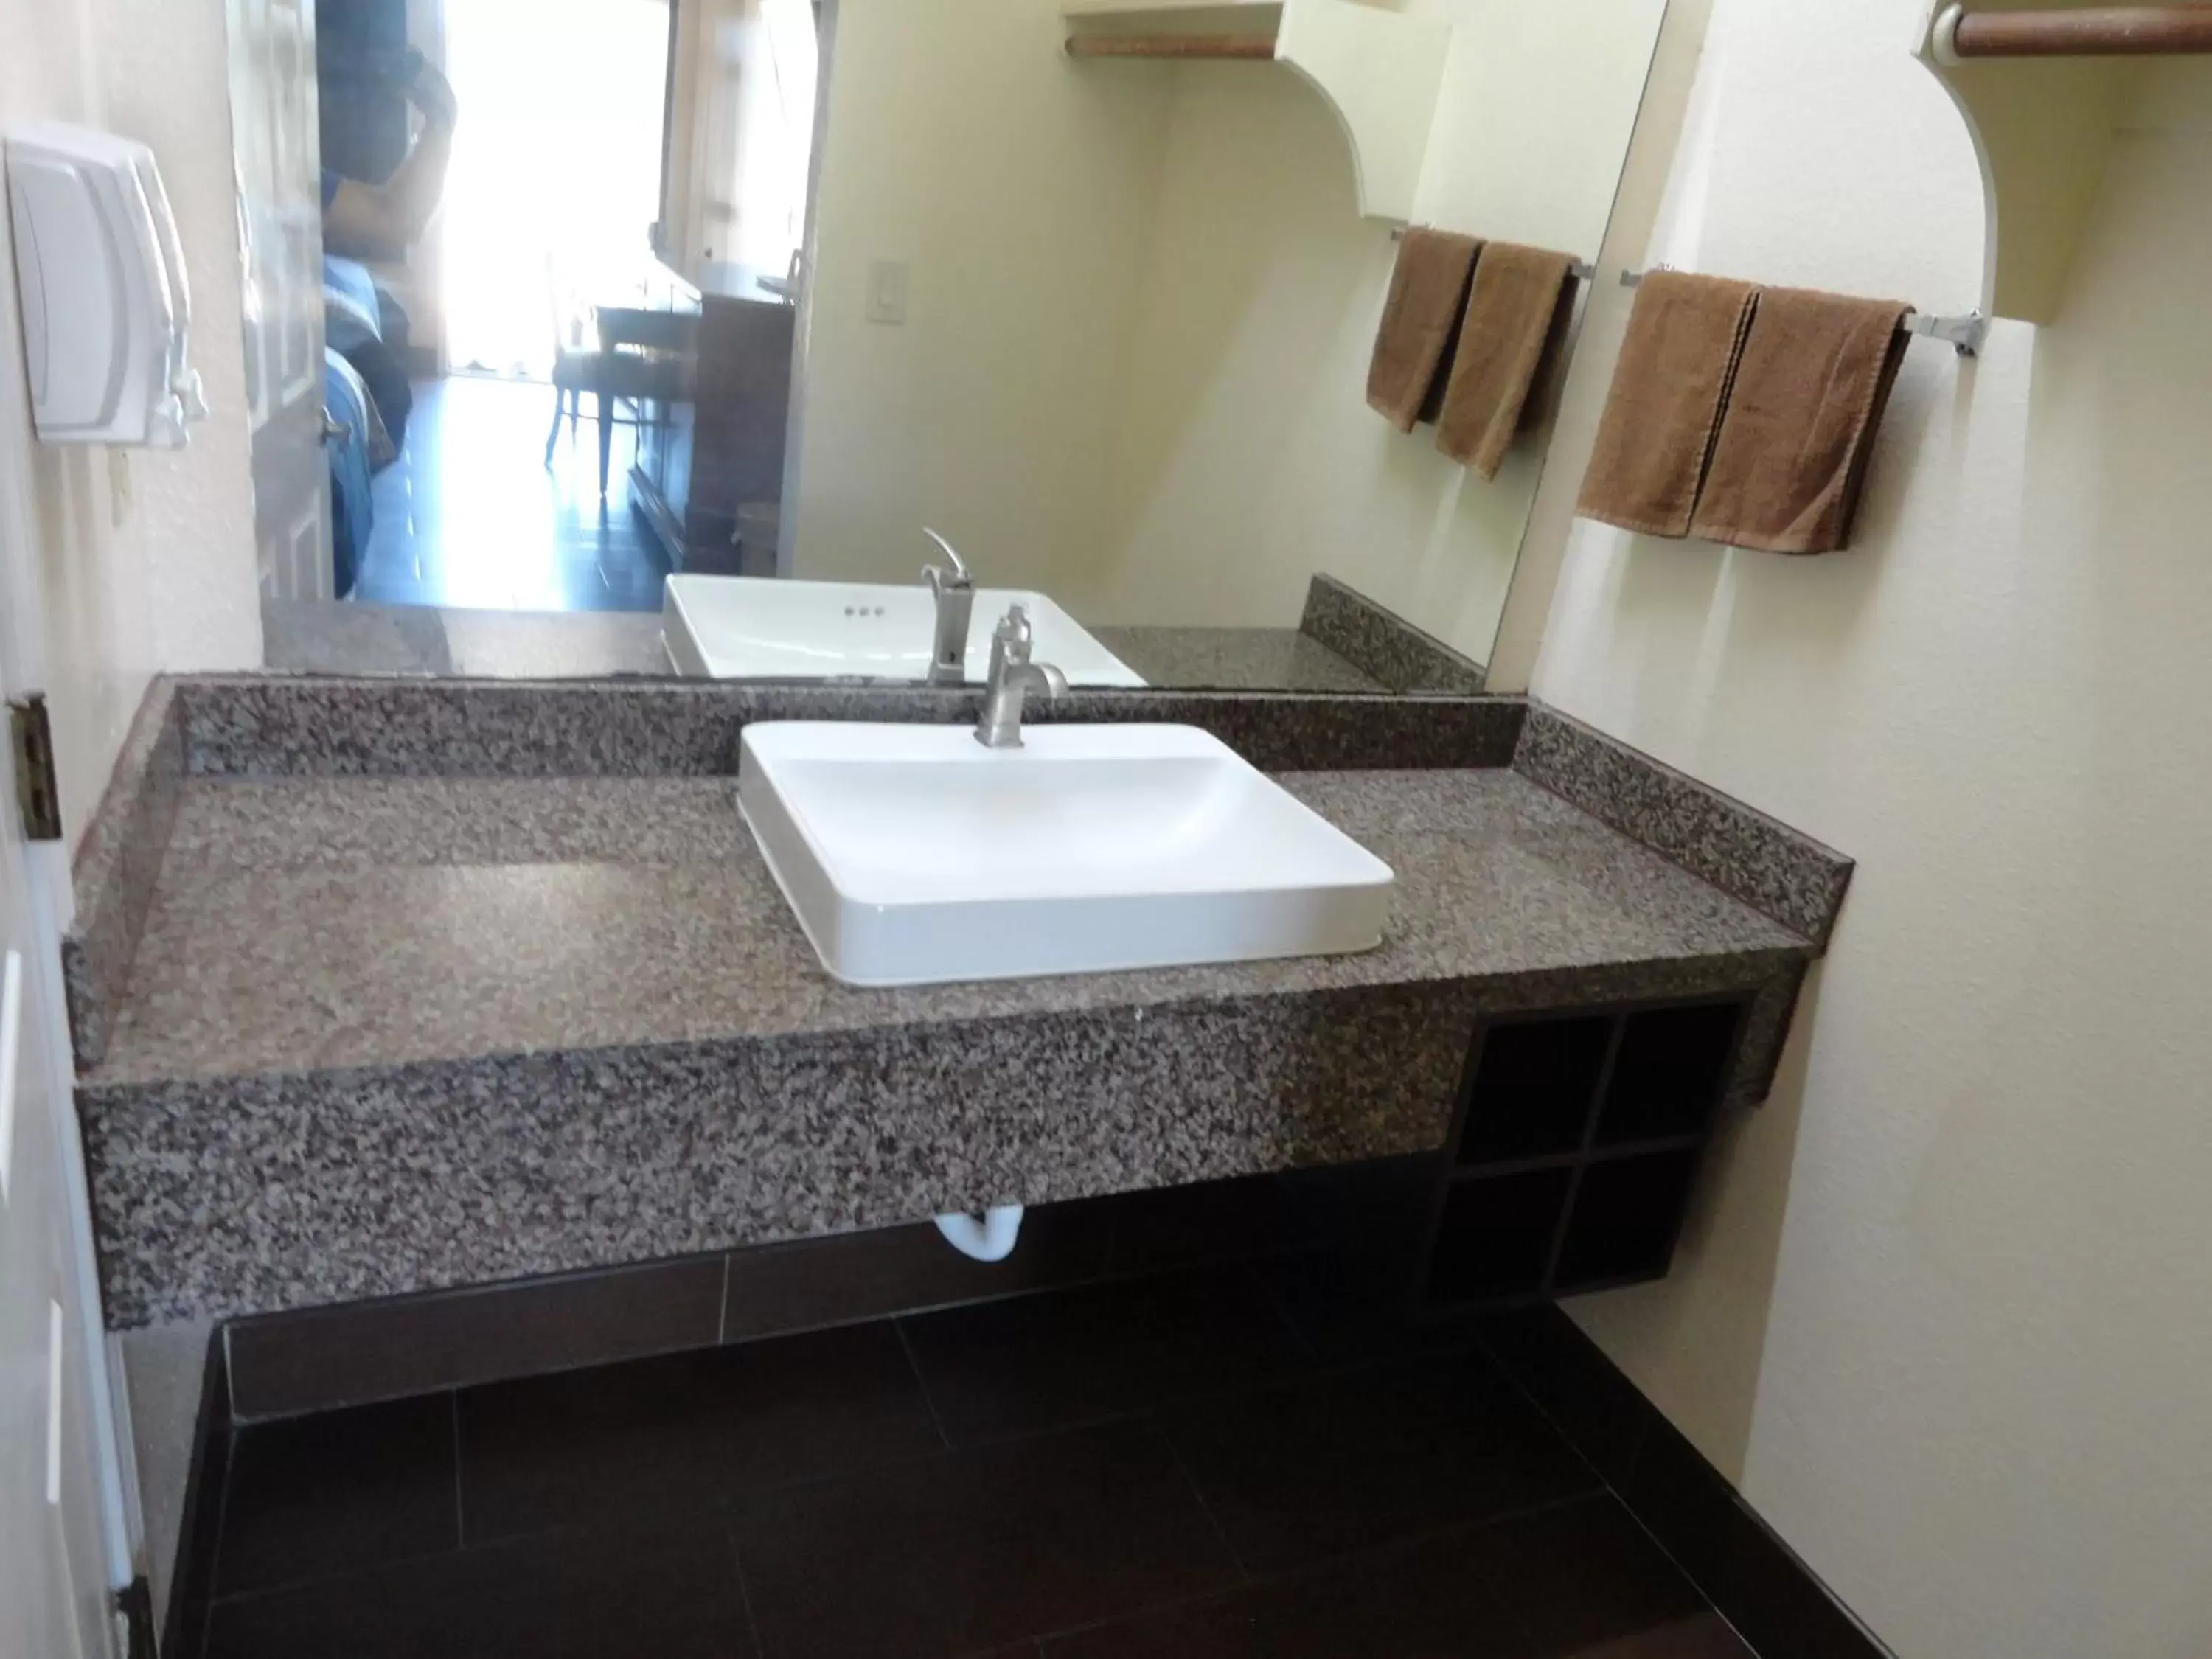 Area and facilities, Bathroom in Americas Best Value Inn - Brownsville